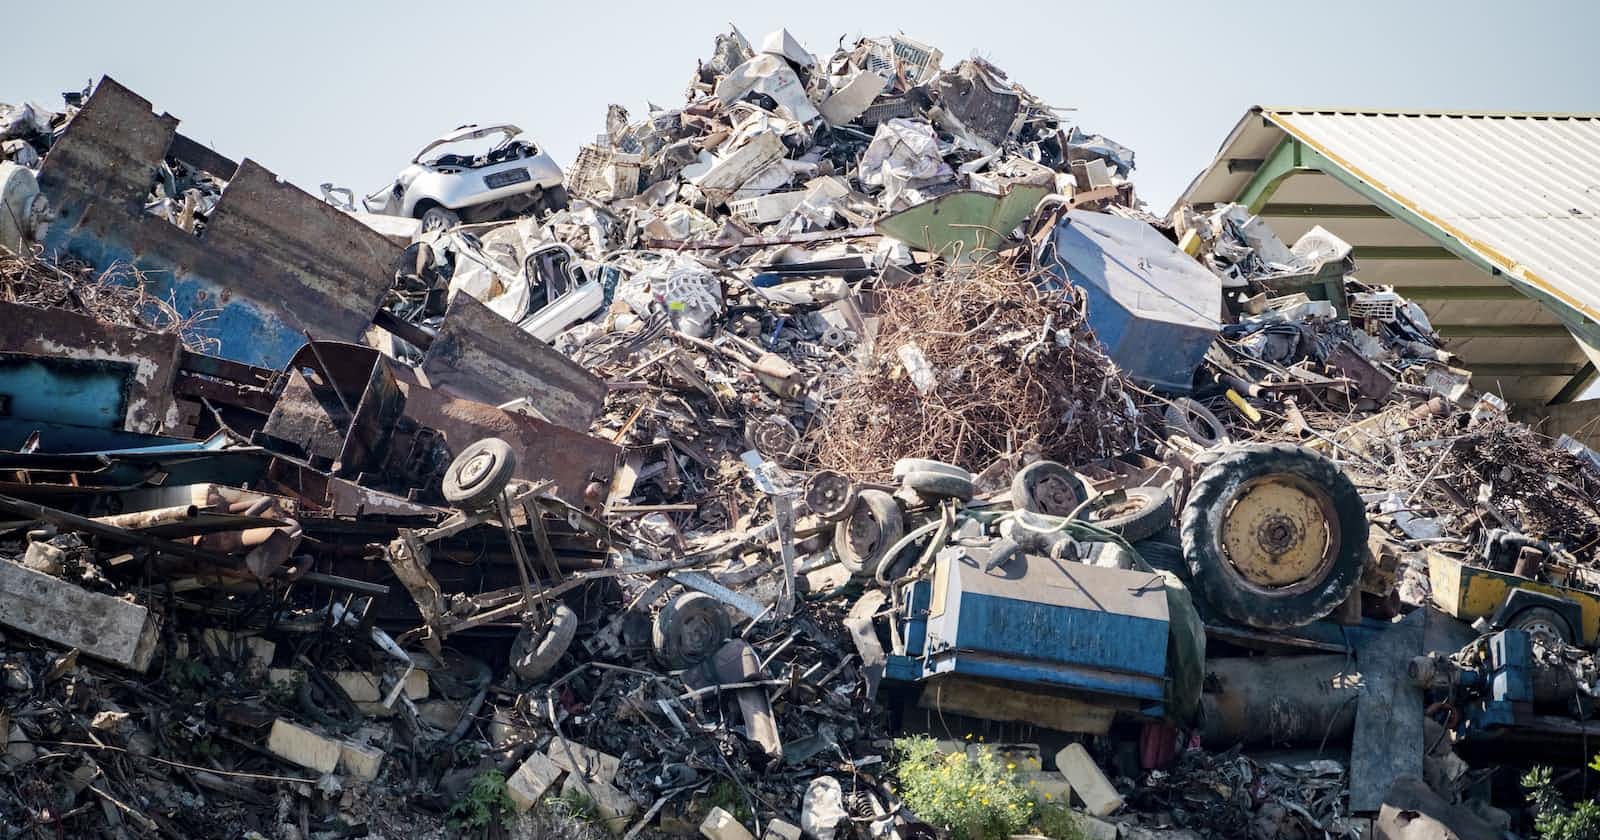 Garbage Collection is slowing down your code